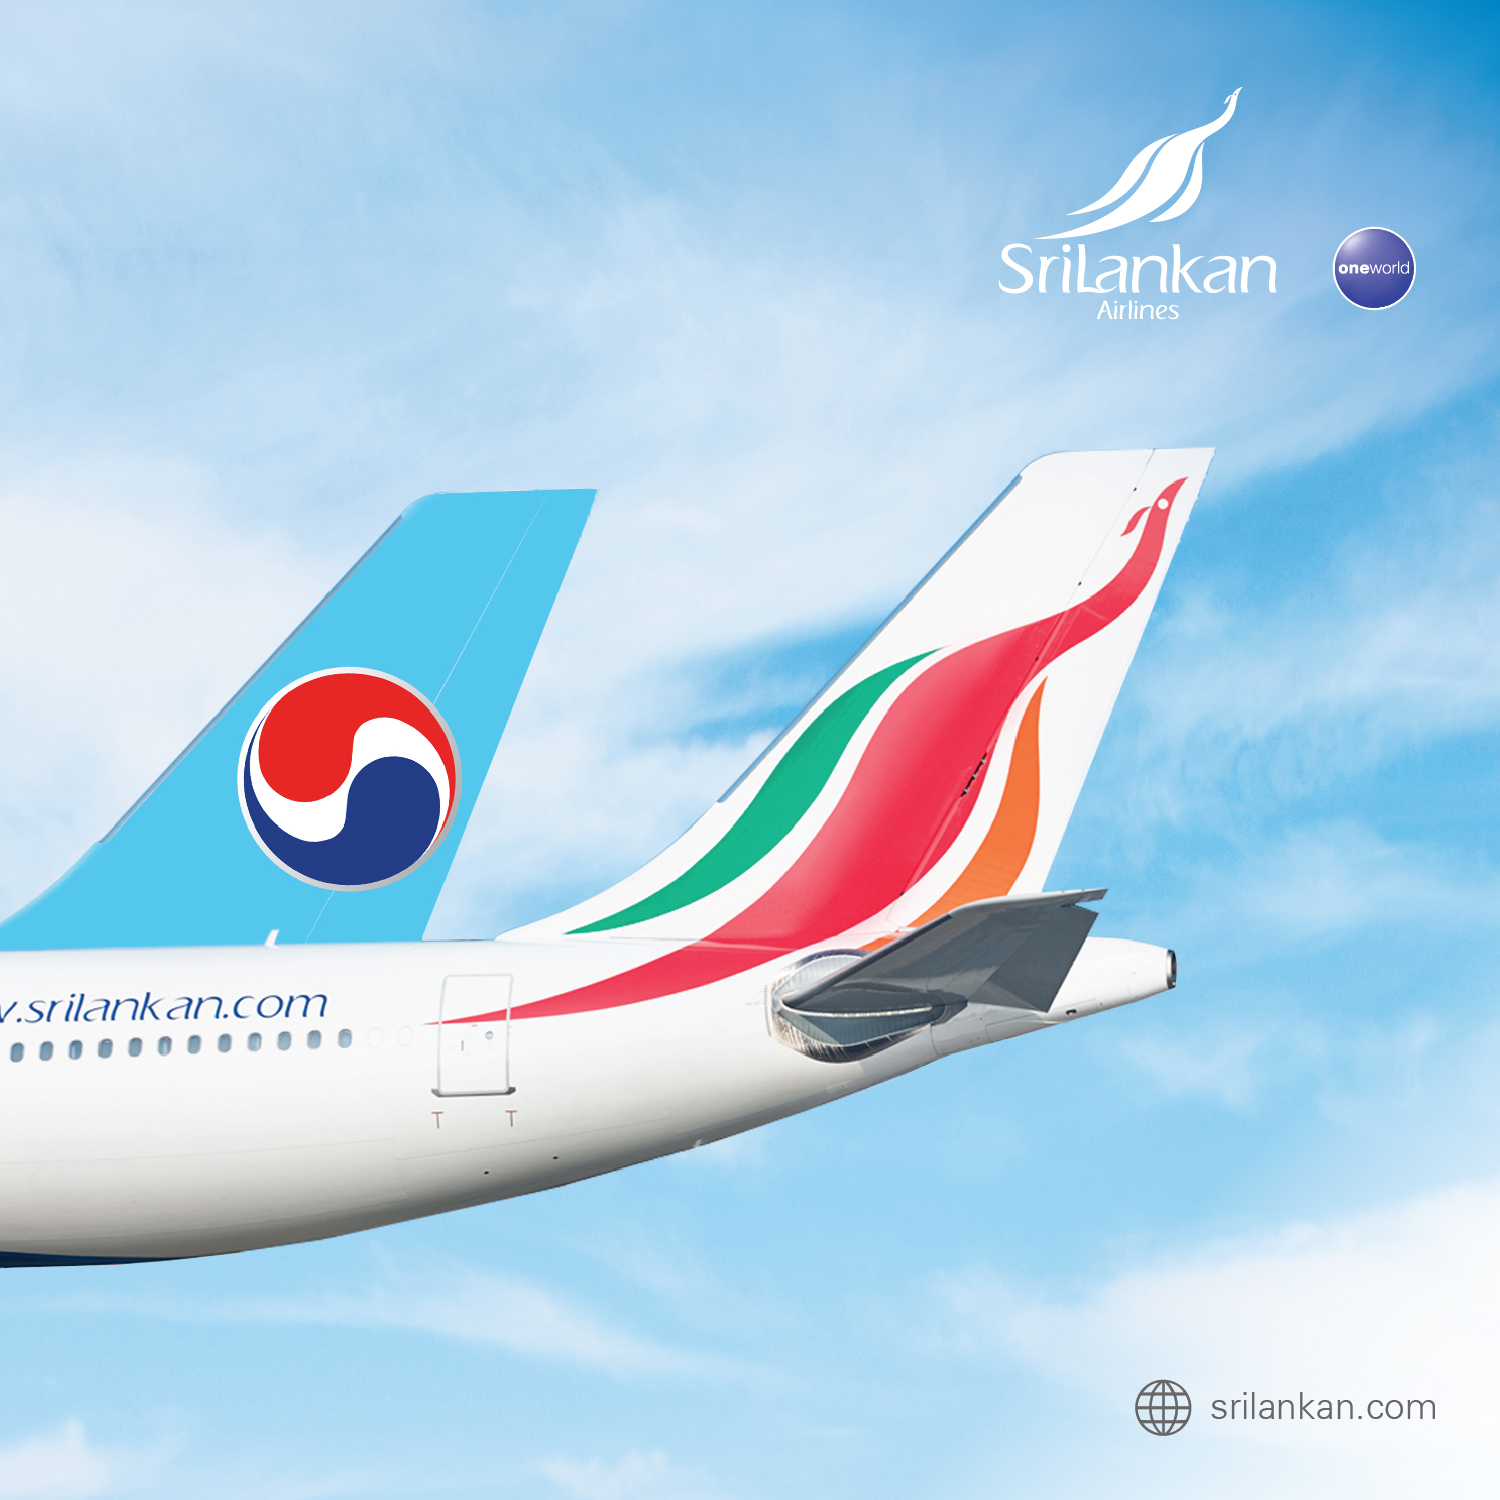 SriLankan Airlines, Korean Air enter into code-share agreement